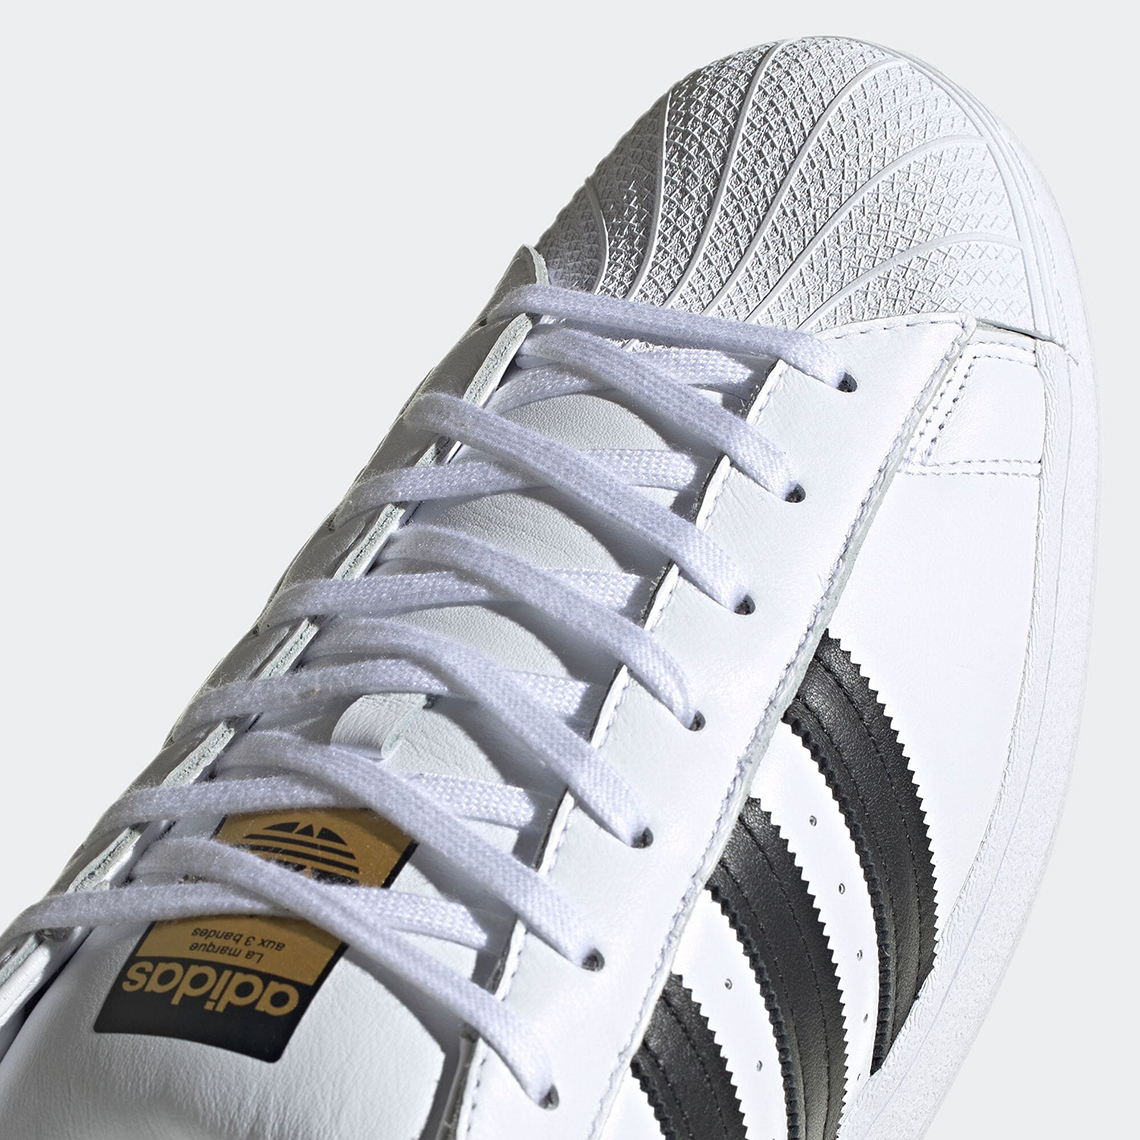 Kerwin Frost adidas Superstar GY5167 4